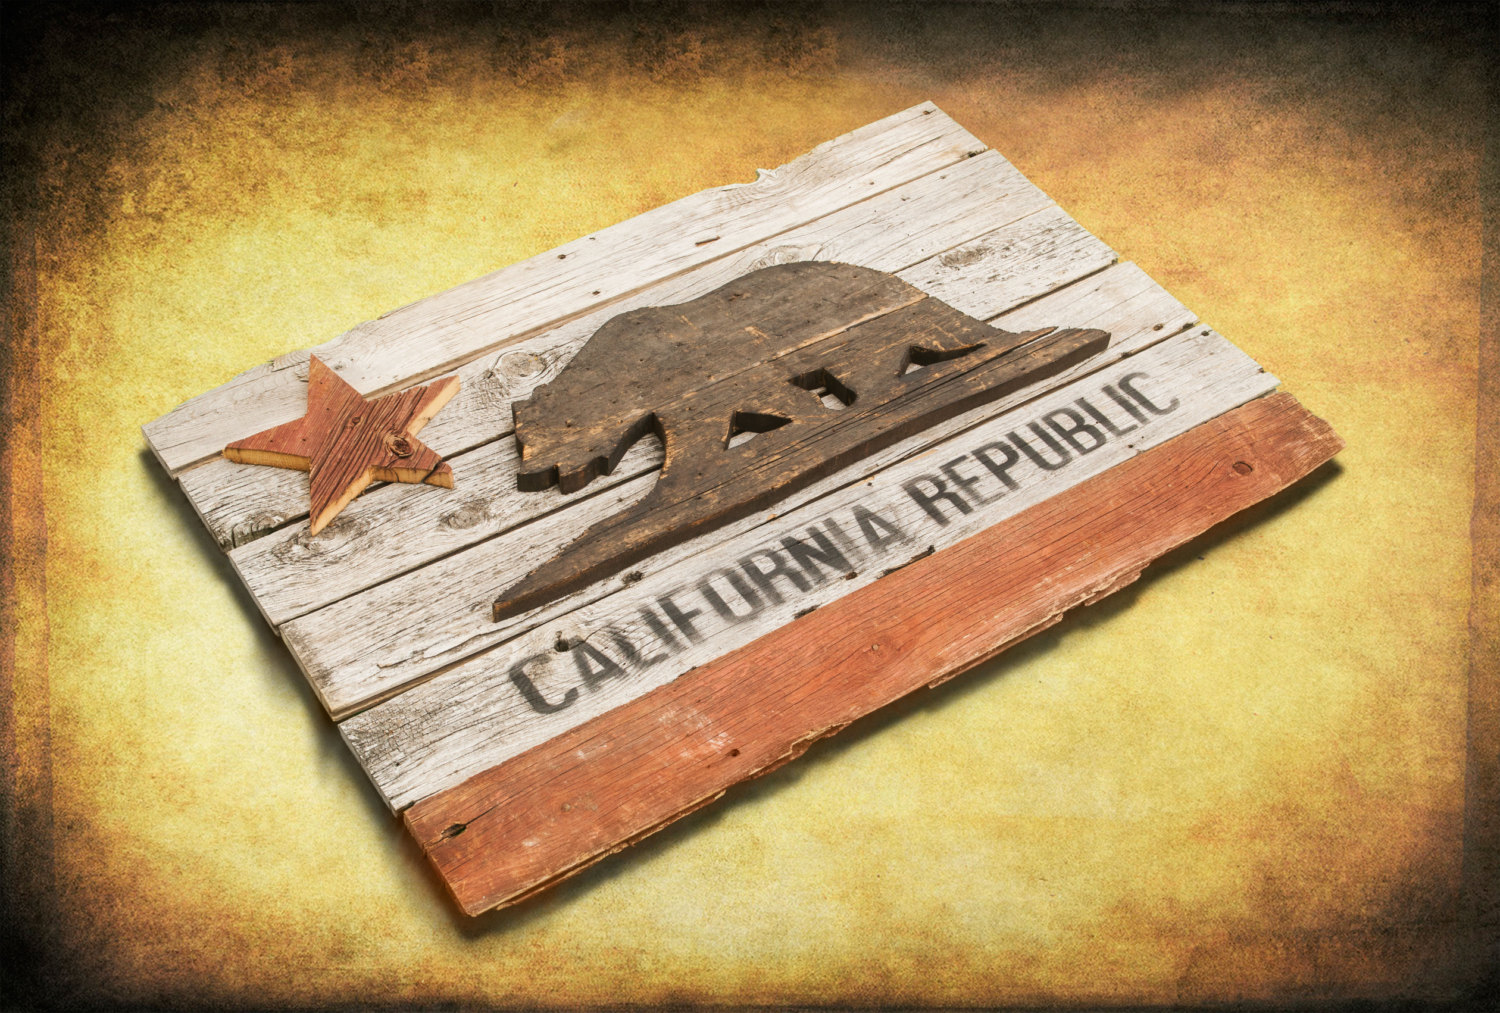 California Republic flag,  Barn Wood Edition,  Wooden, vintage, art, distressed, weathered, recycled, California flag art. Repurposed